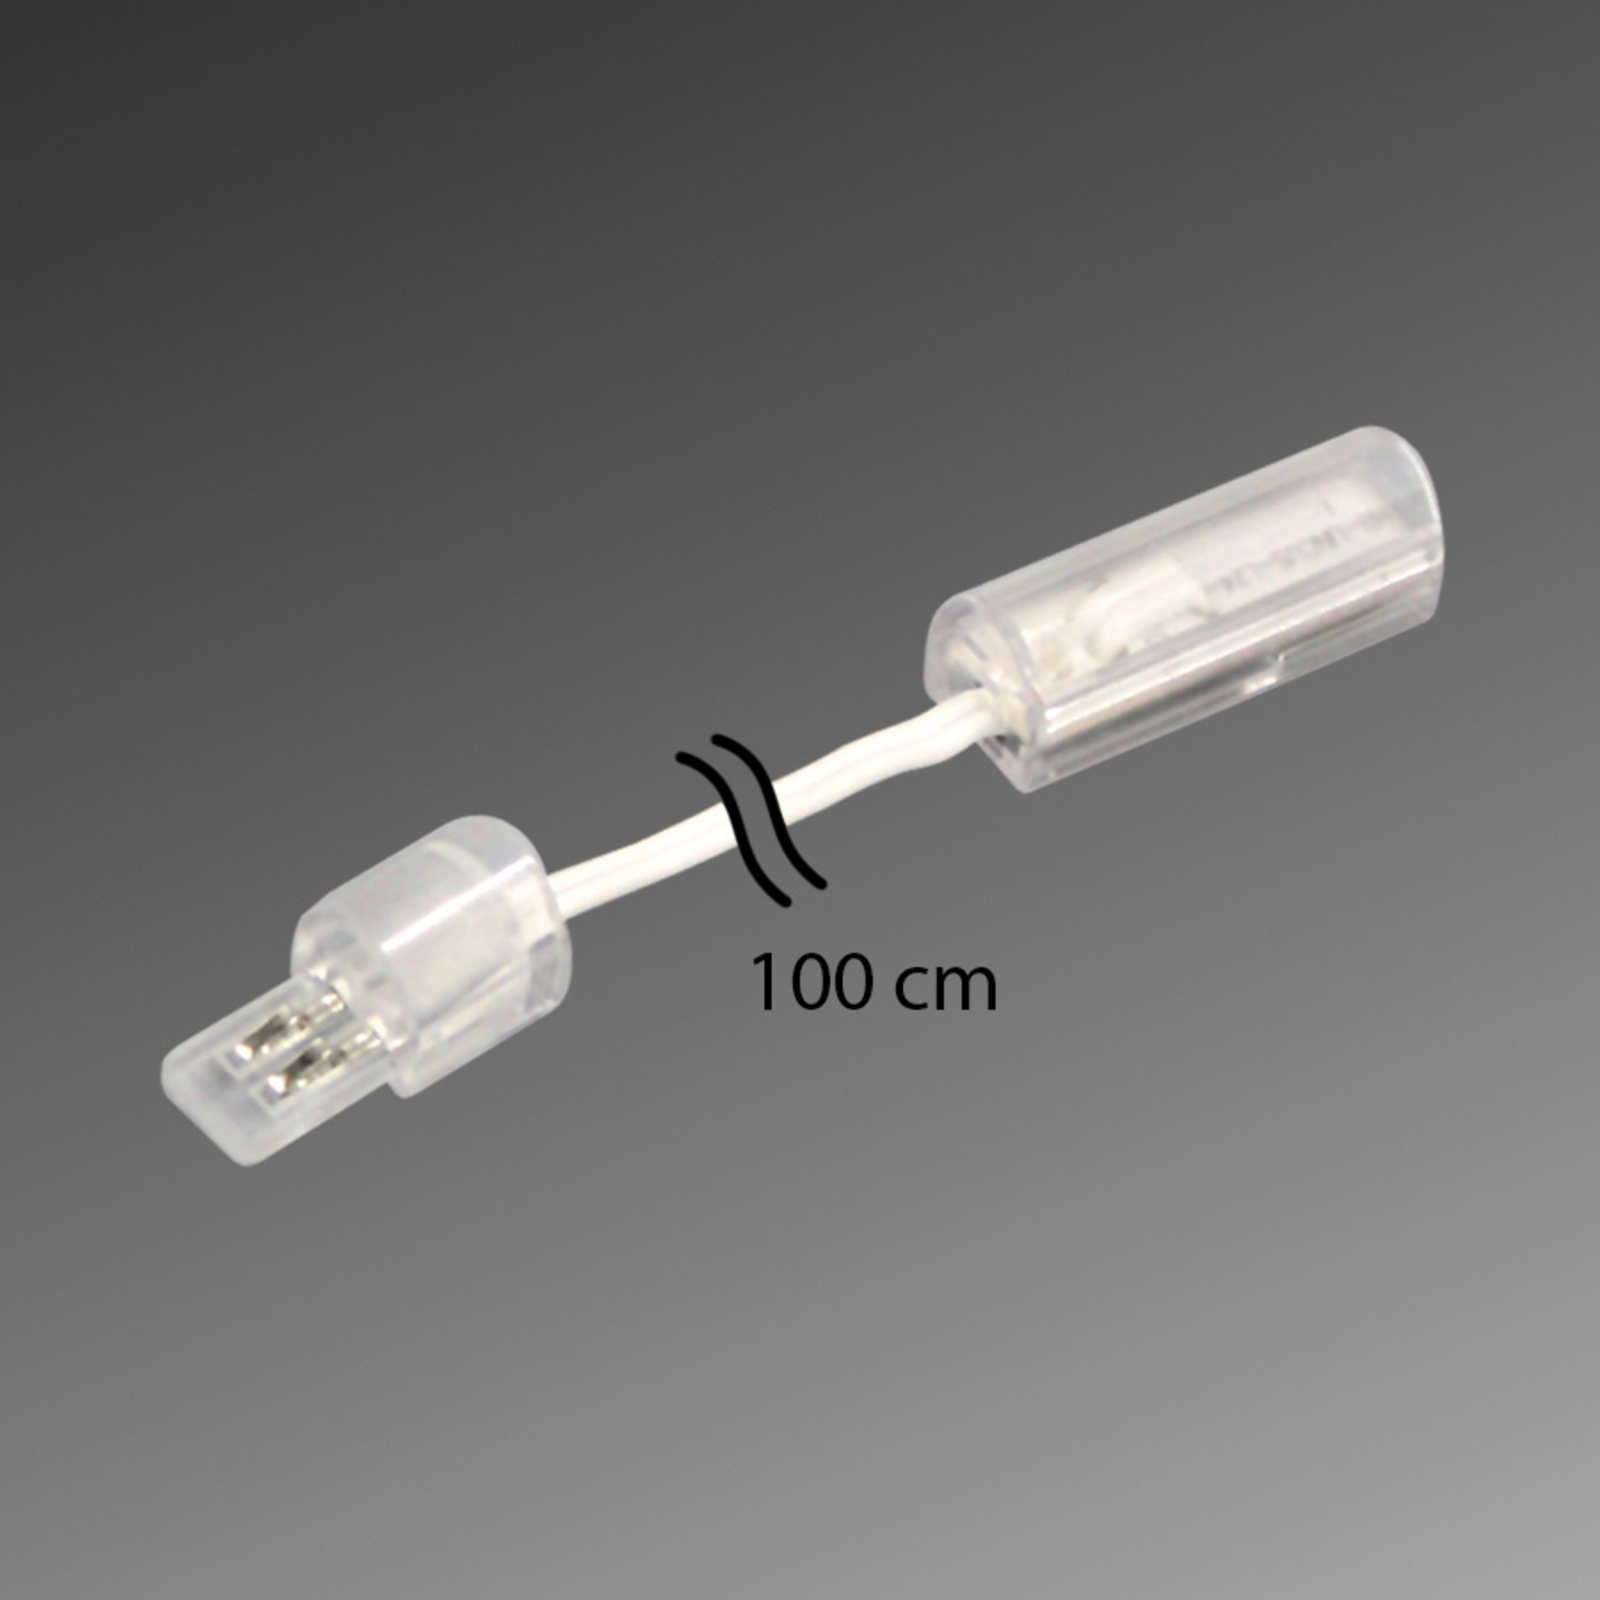 Connection cable for LED STICK 2, 100 cm